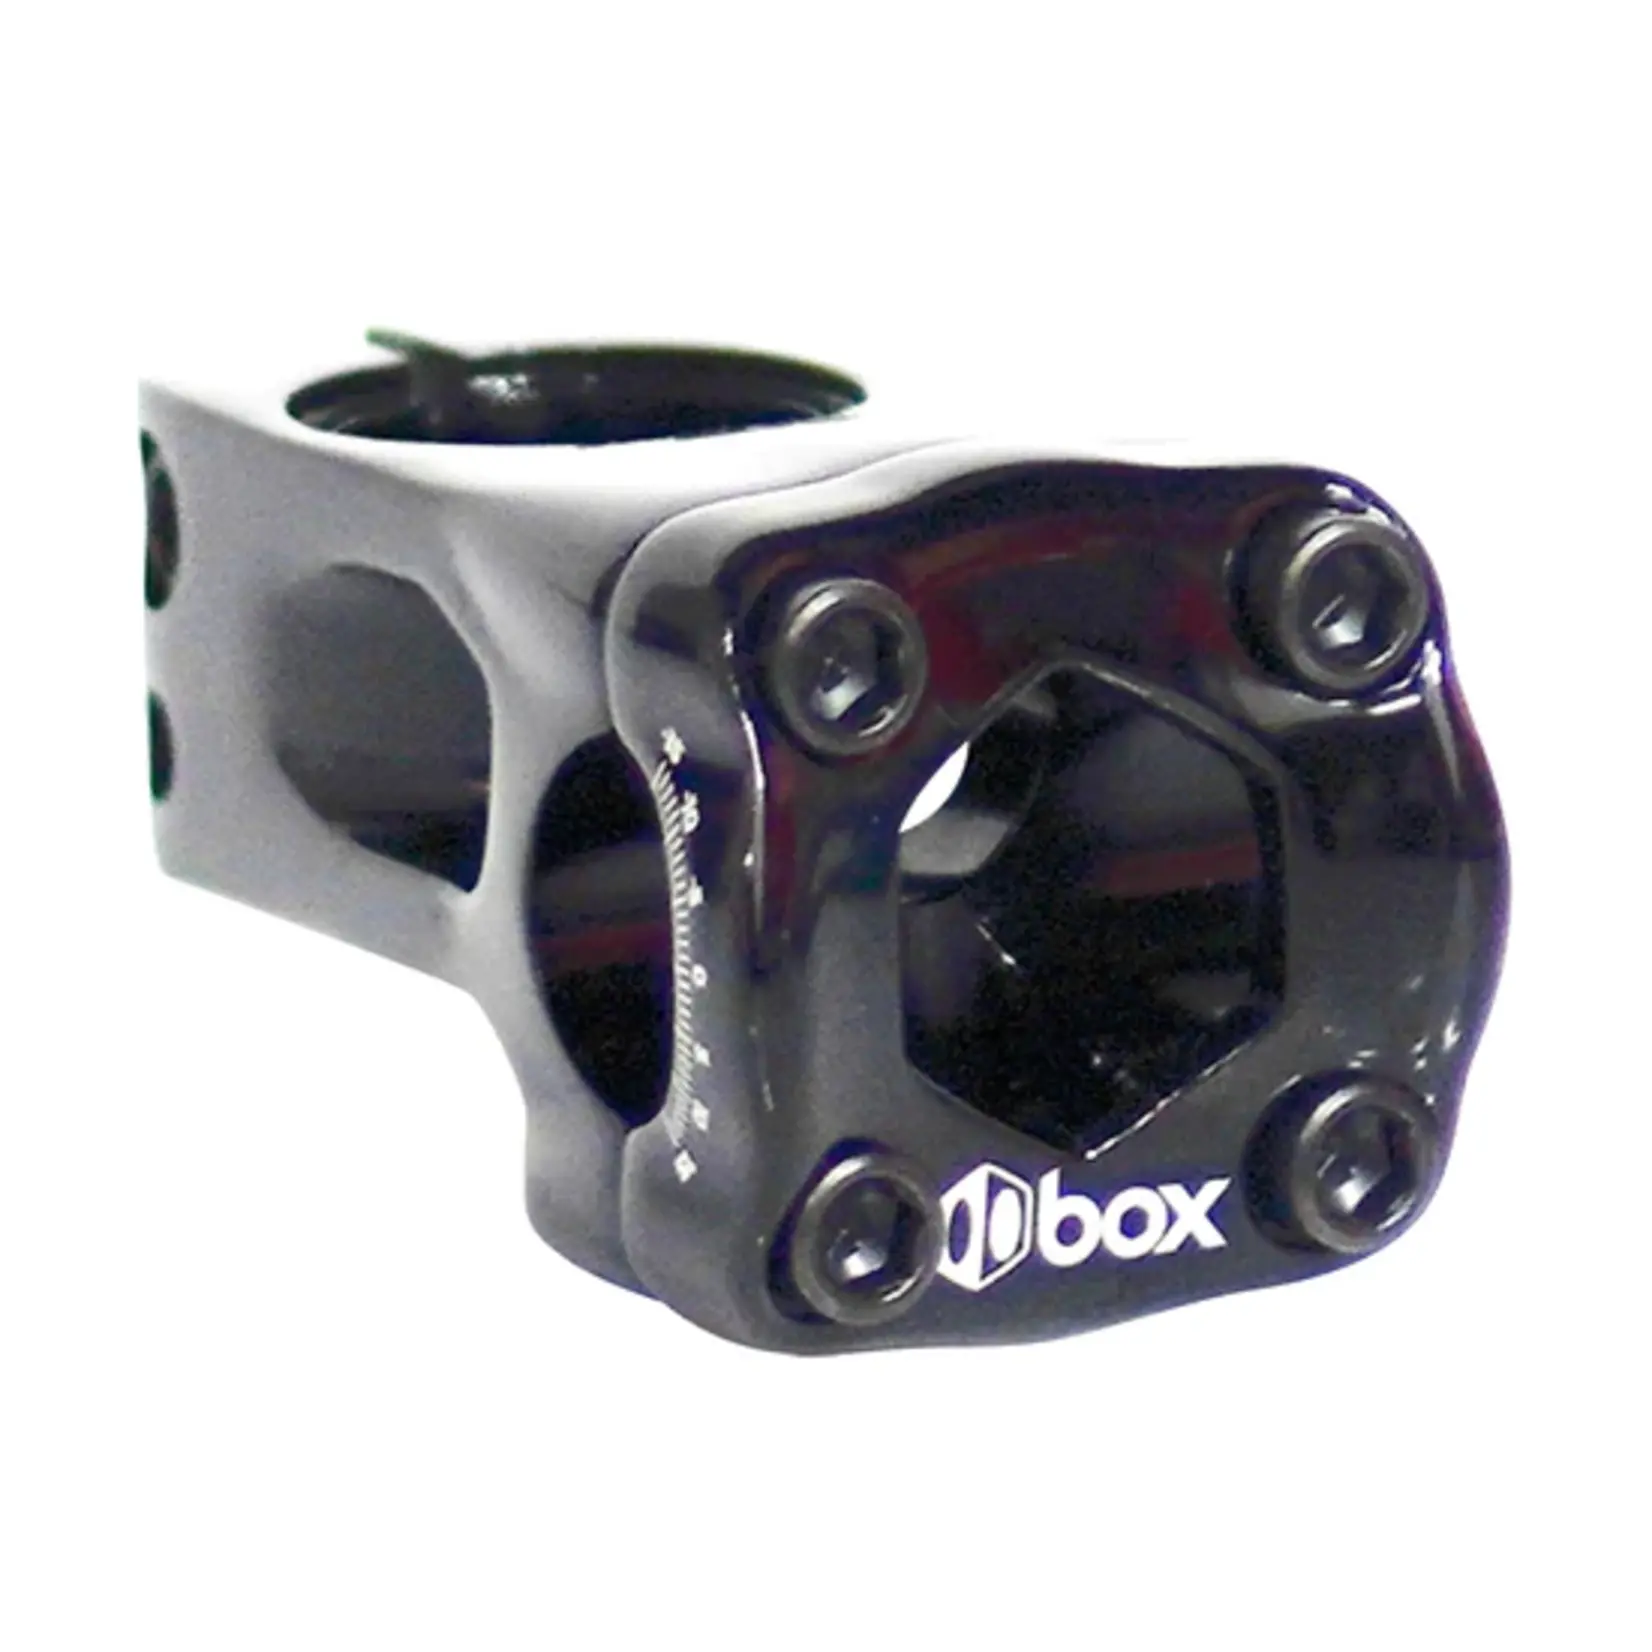 Box Components Box One Oversized 31.8x1-1/8" Front Load Stem Black